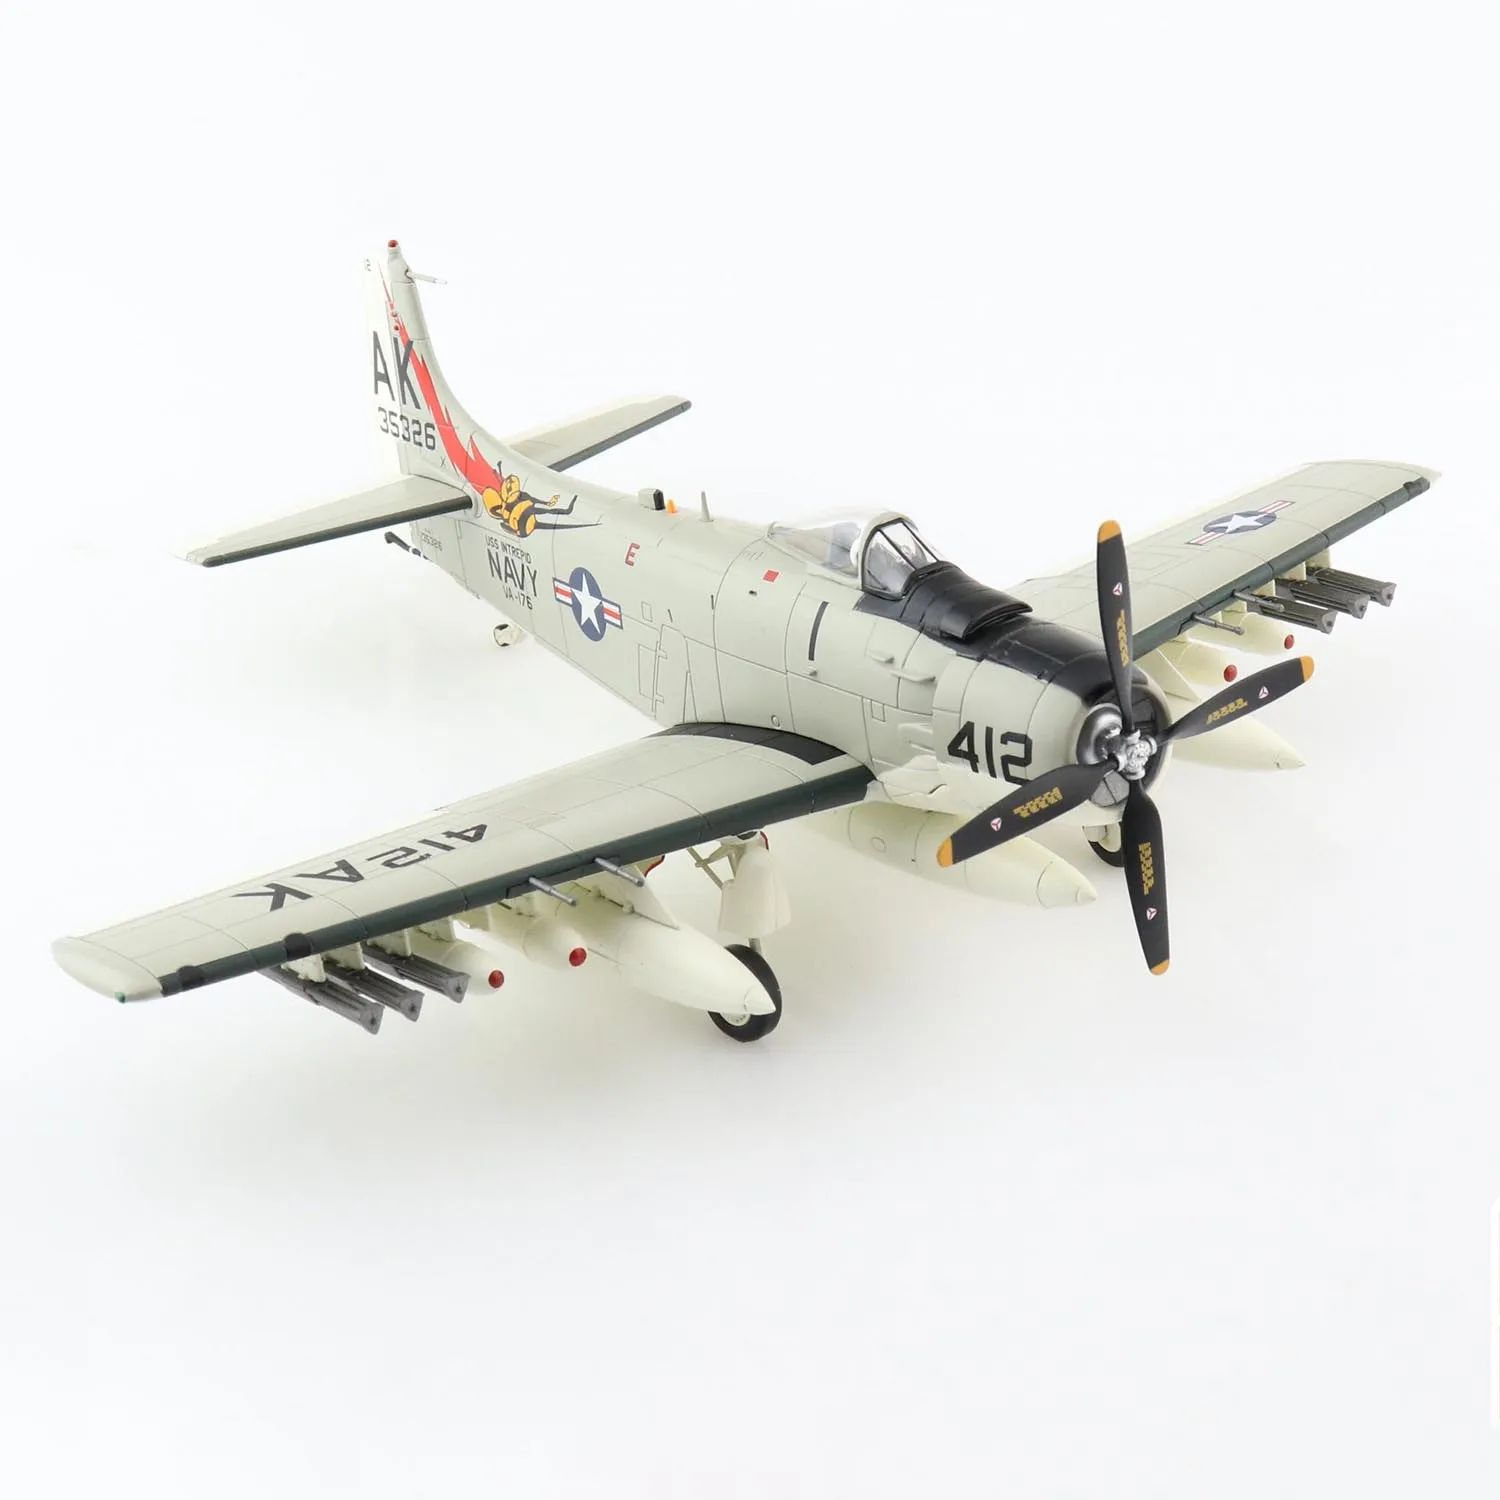 

1:72 United States Air Force A-1H Warplane Alloy & Plastic Simulation Model Gift Collection Decorative Toy Diecast